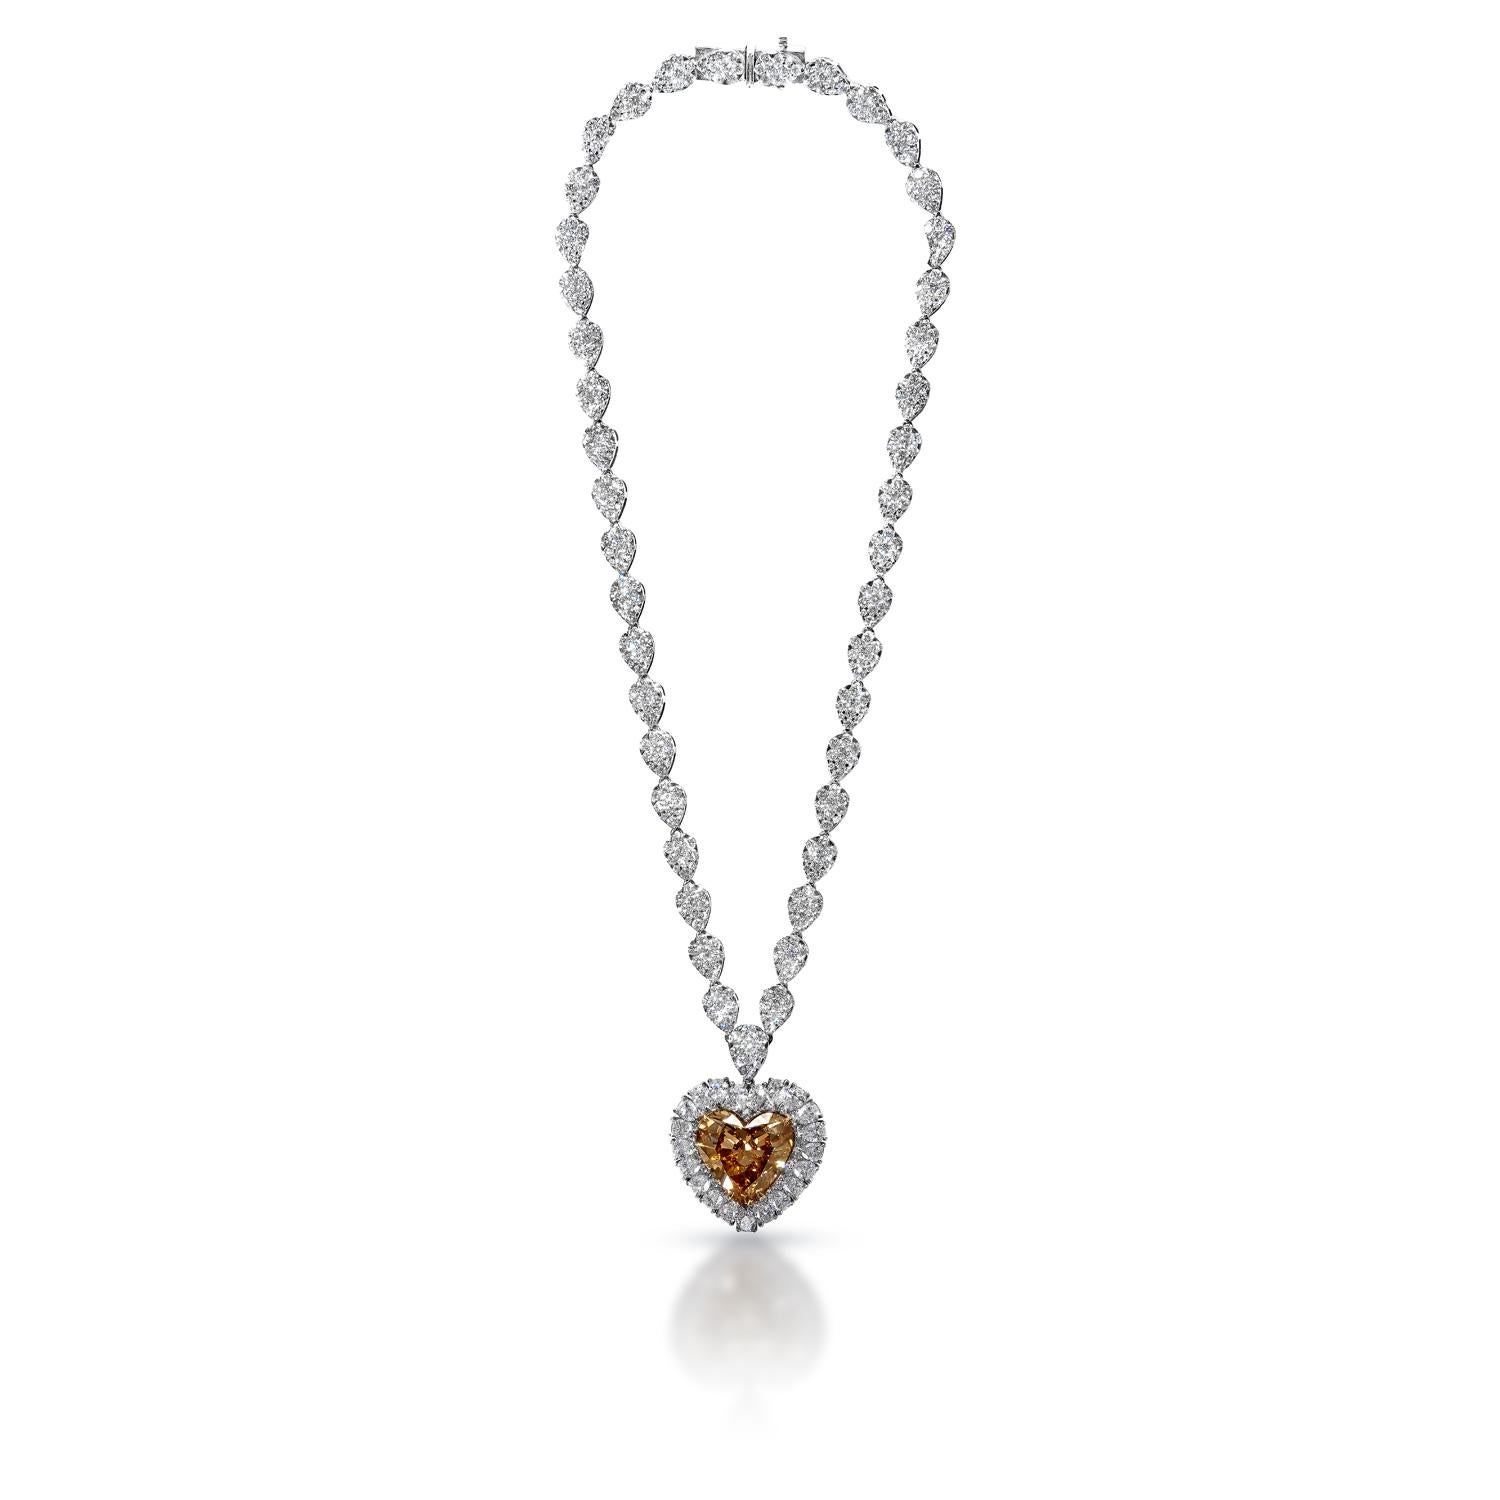 This stunning diamond necklace, inspired by the iconic one from James Cameron's Titanic movie, will have you feeling like the belle of the ball. The pendant is a heart shaped diamond swing and boasts 20 carats of a stunningly fancy brown hue. 29